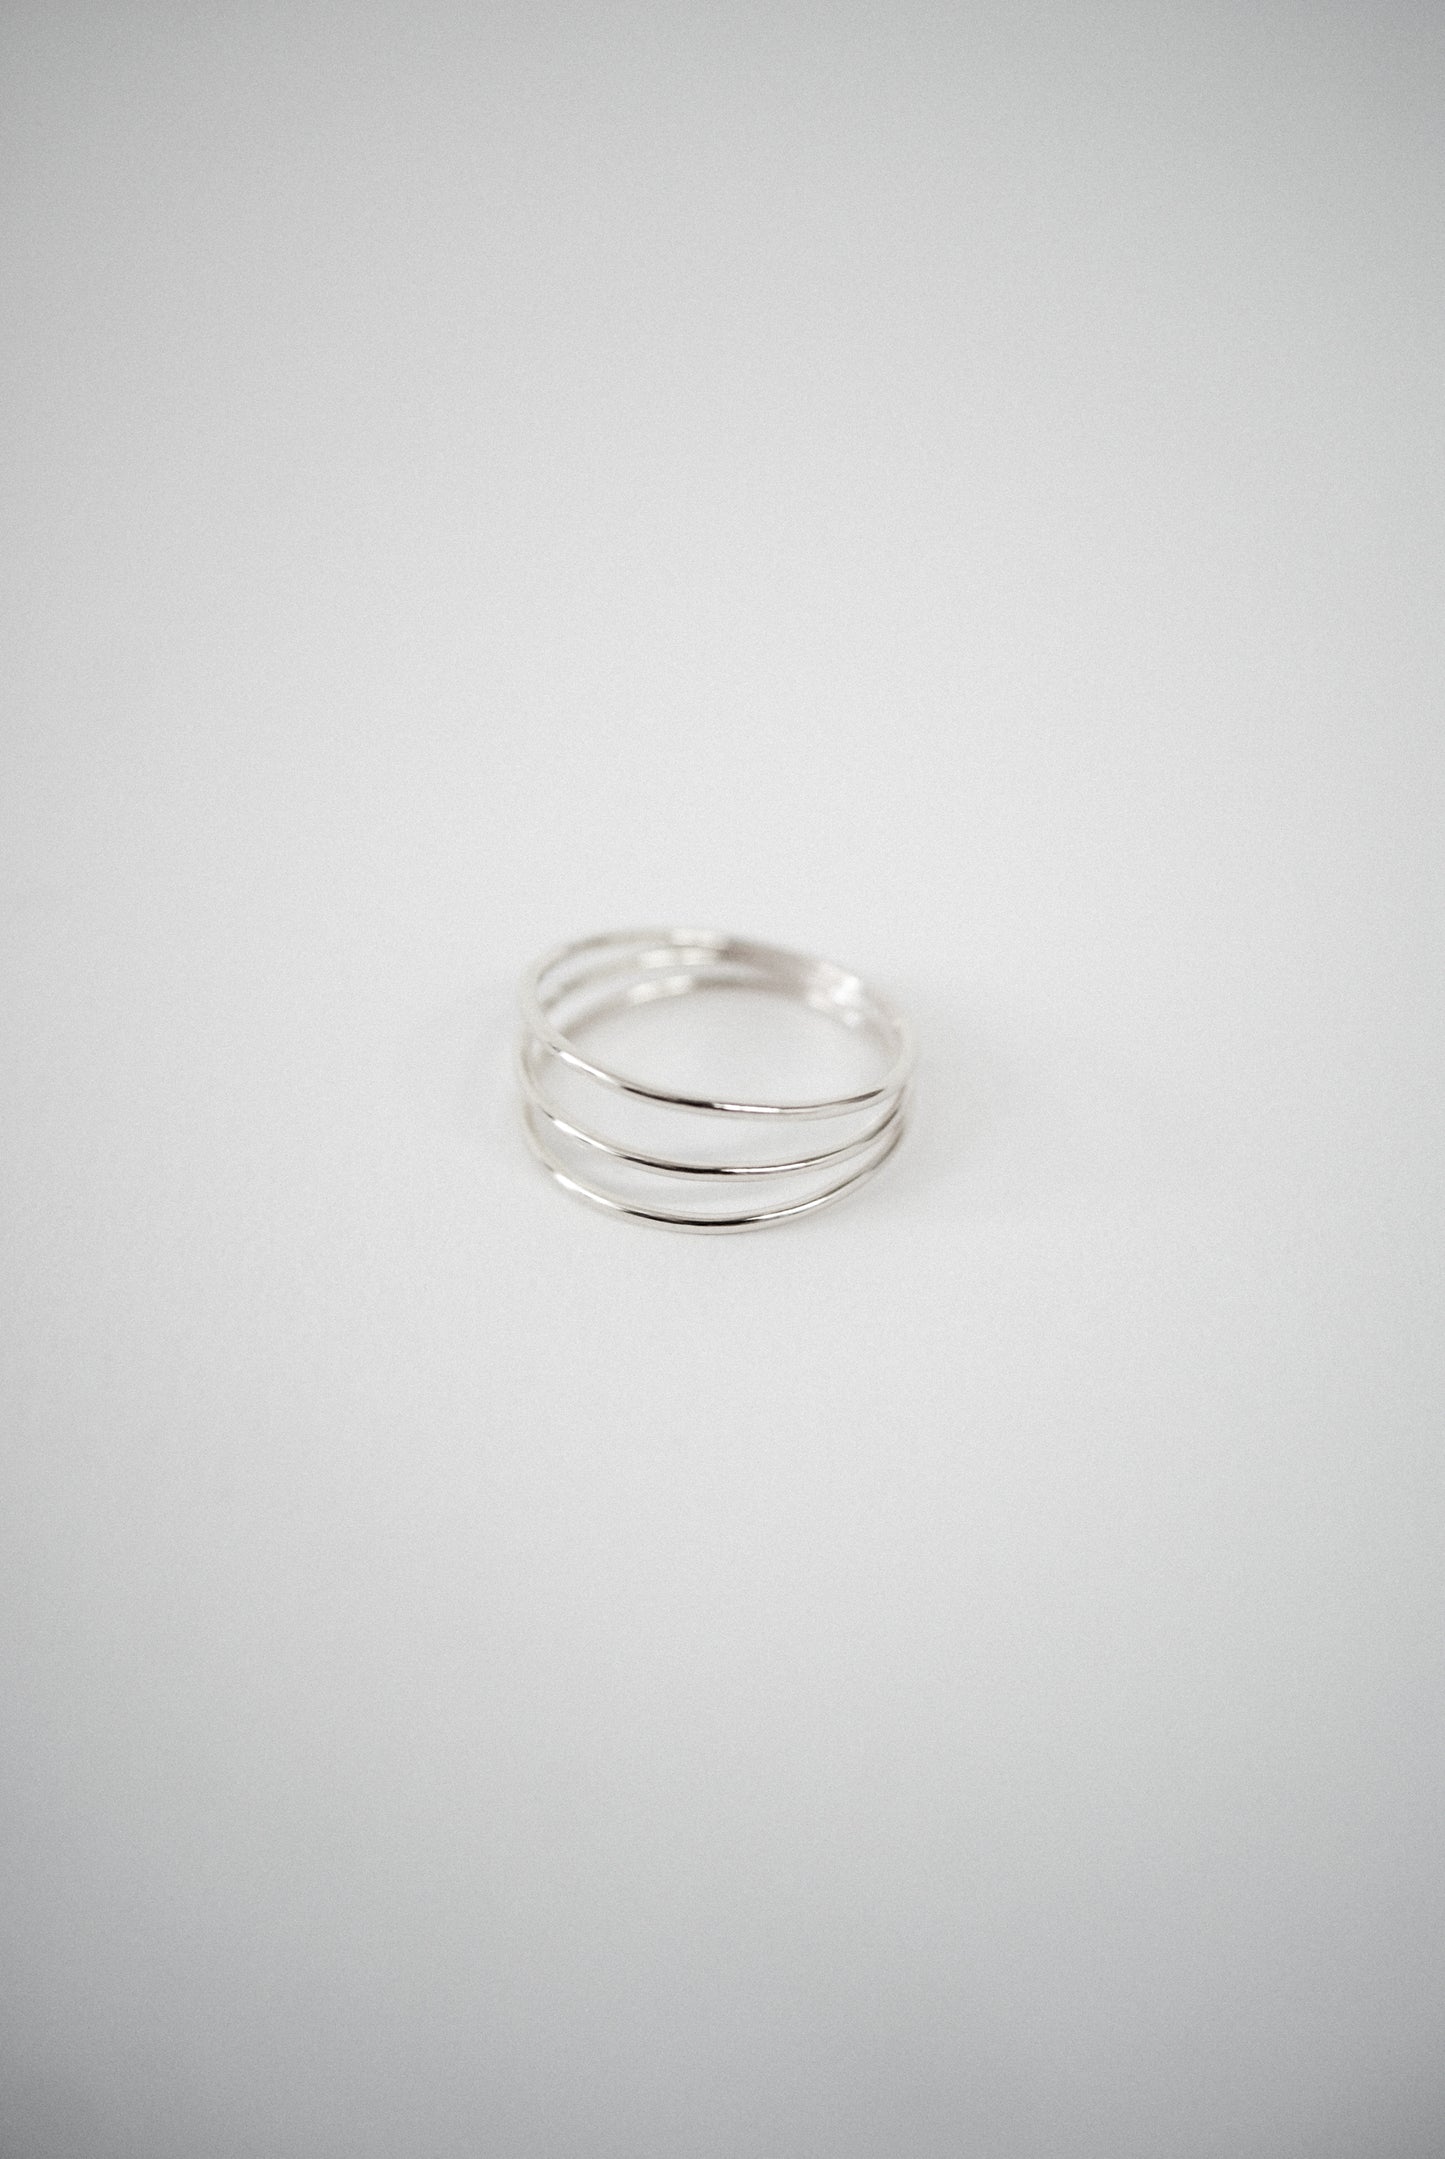 Connected Set of 3 Rings, Sterling Silver